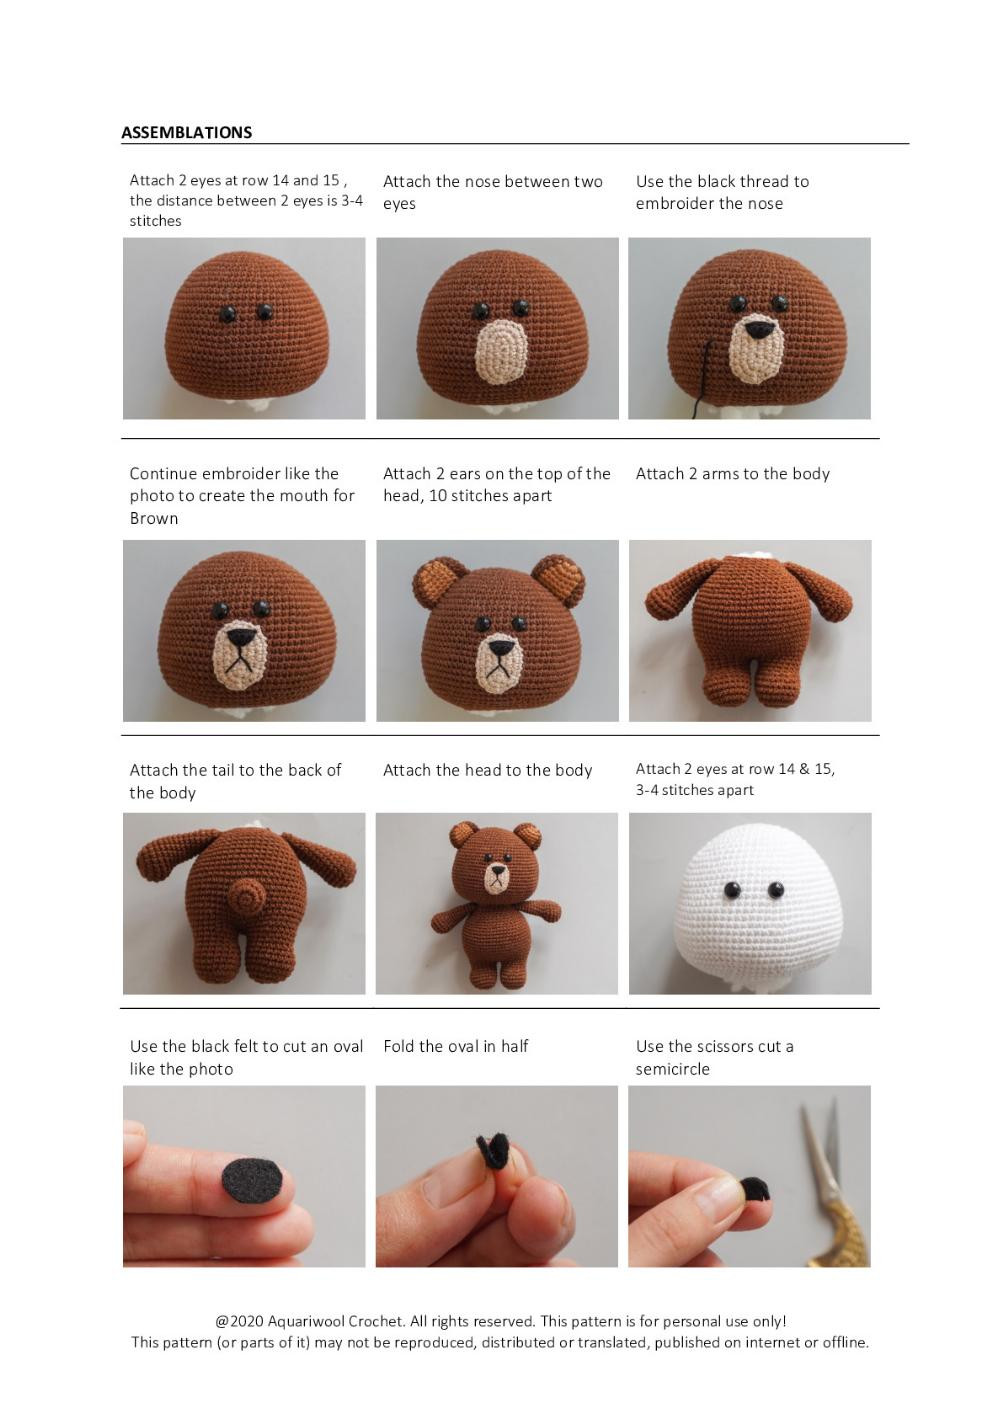 BROWN & CONY white rabbit and brow bear